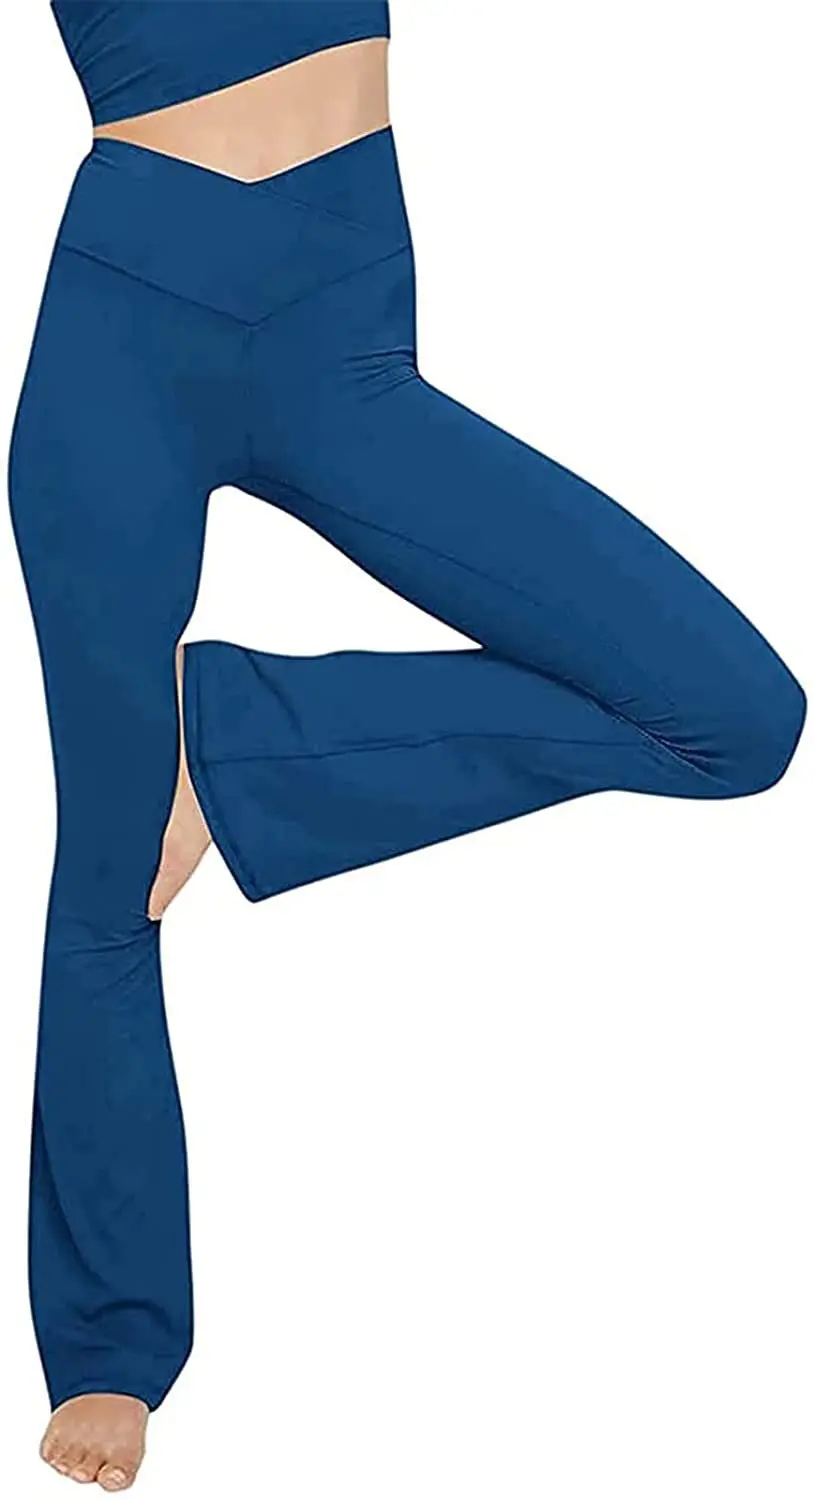 Women Stretch Leggings Casual High Waist Compression Fitness Workout Long Jogging Running Trousers Pant